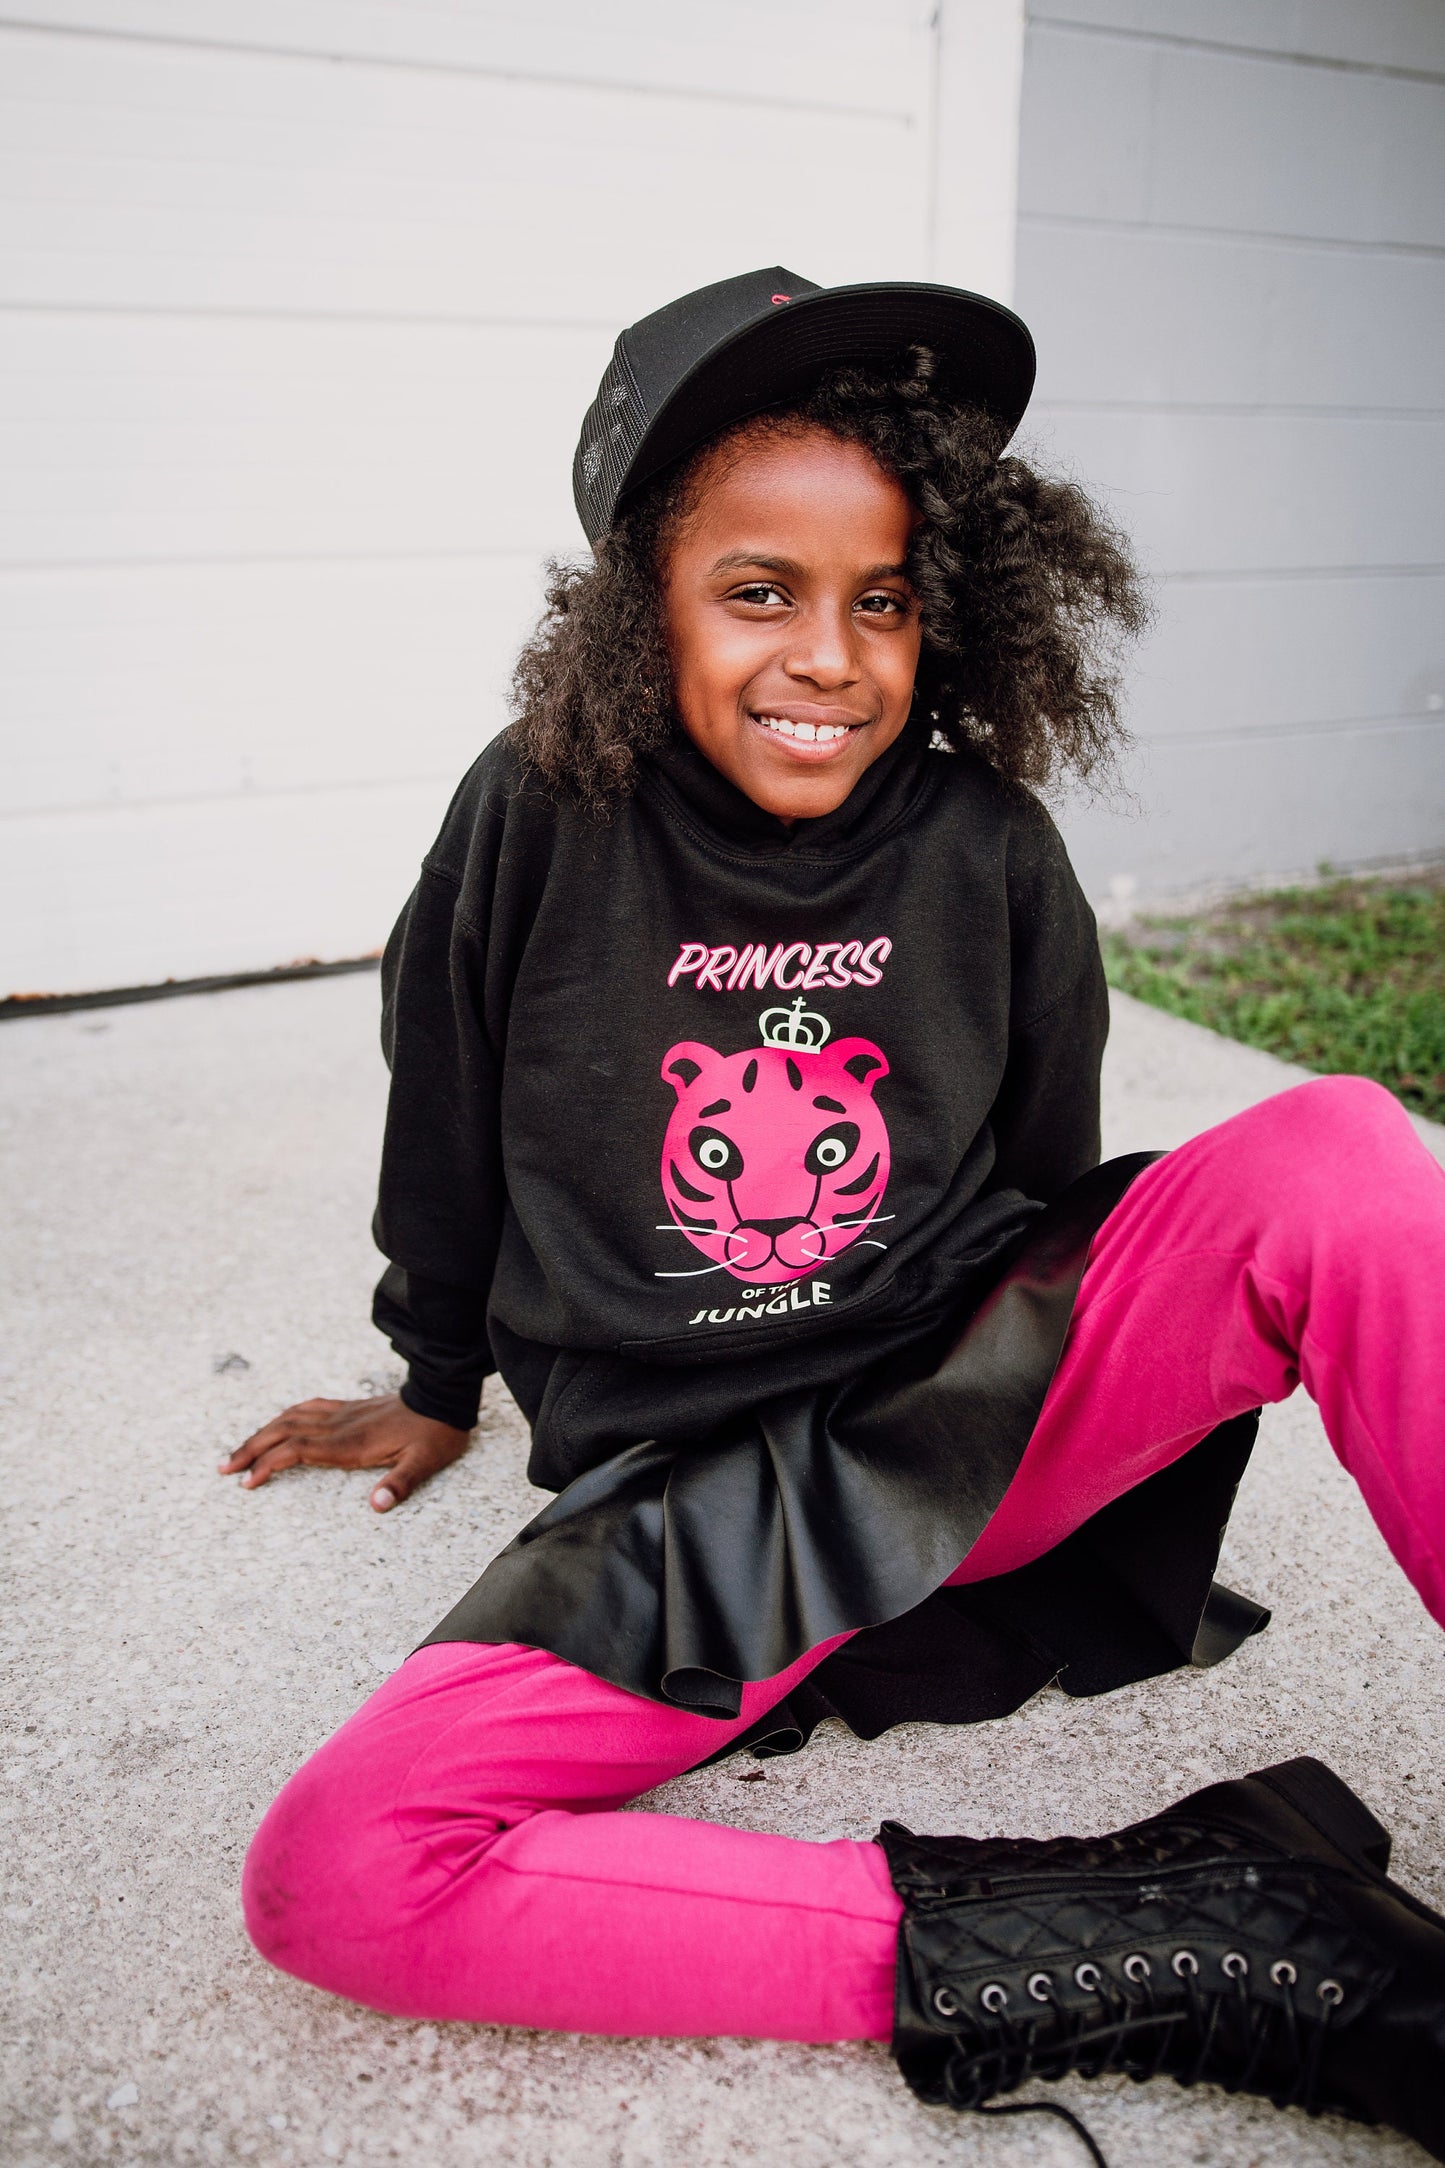 Princess hoodie for kids, gift for kids, gift for her, hoodie for girls, pink tiger princess sweater